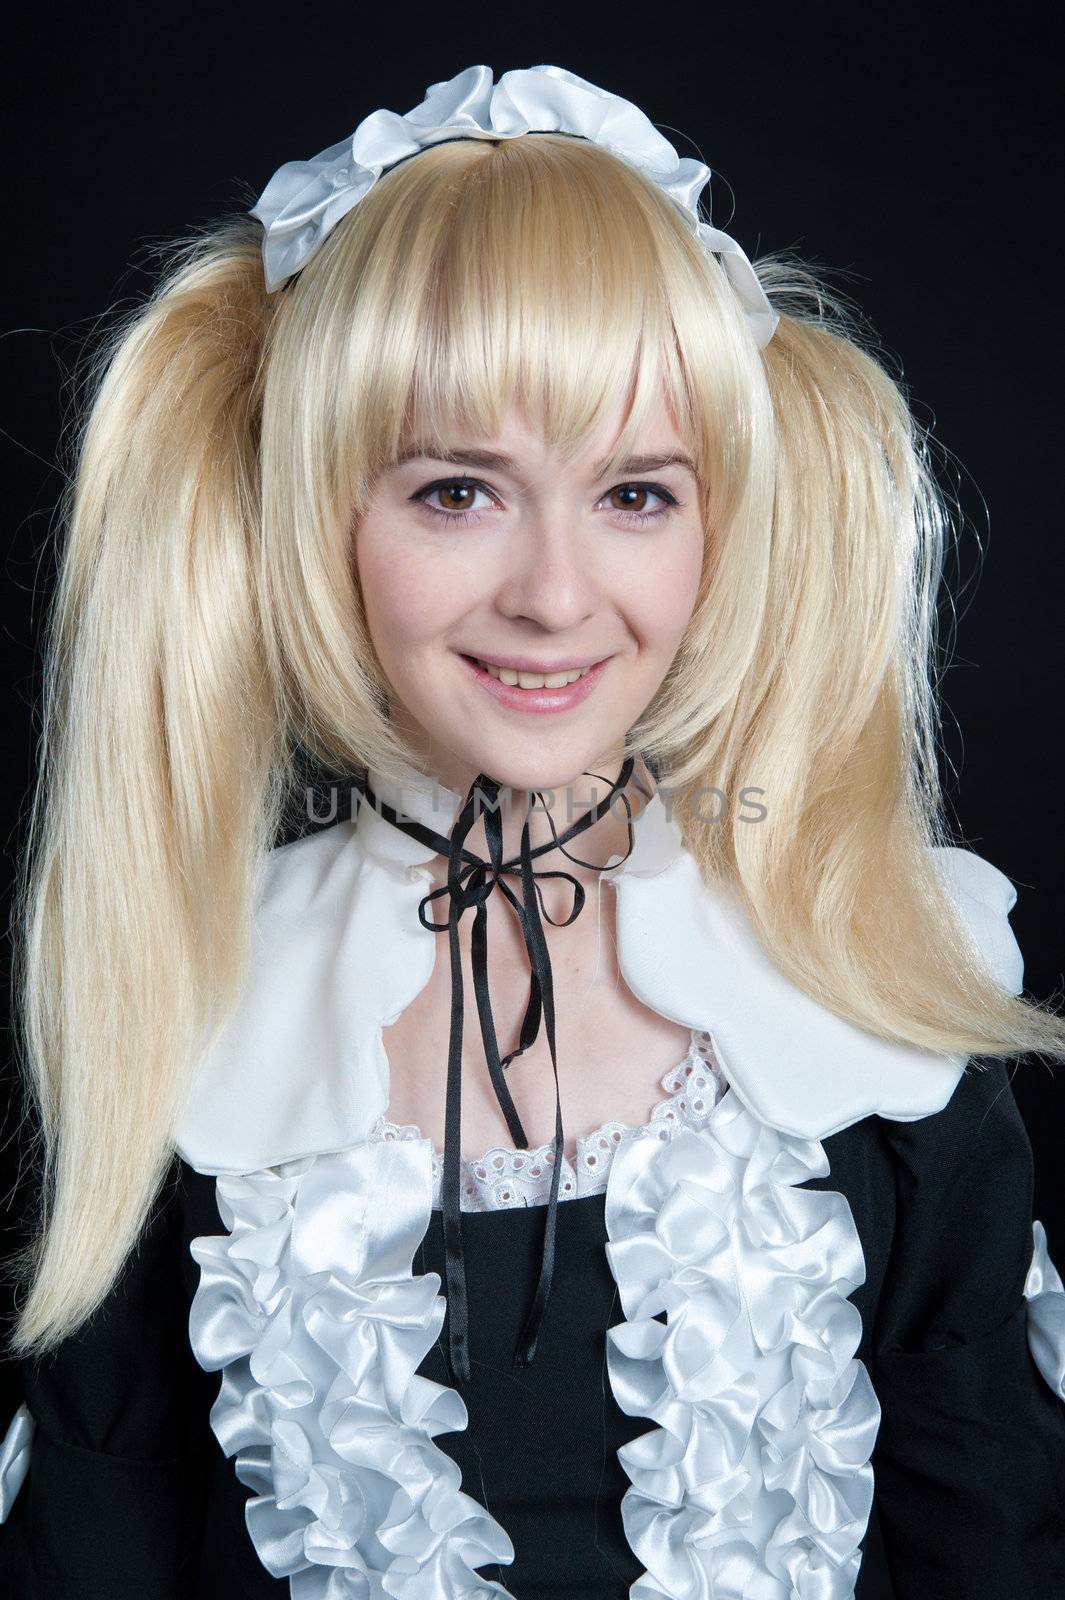 Portrait of young girl in anime lolita suit on black background